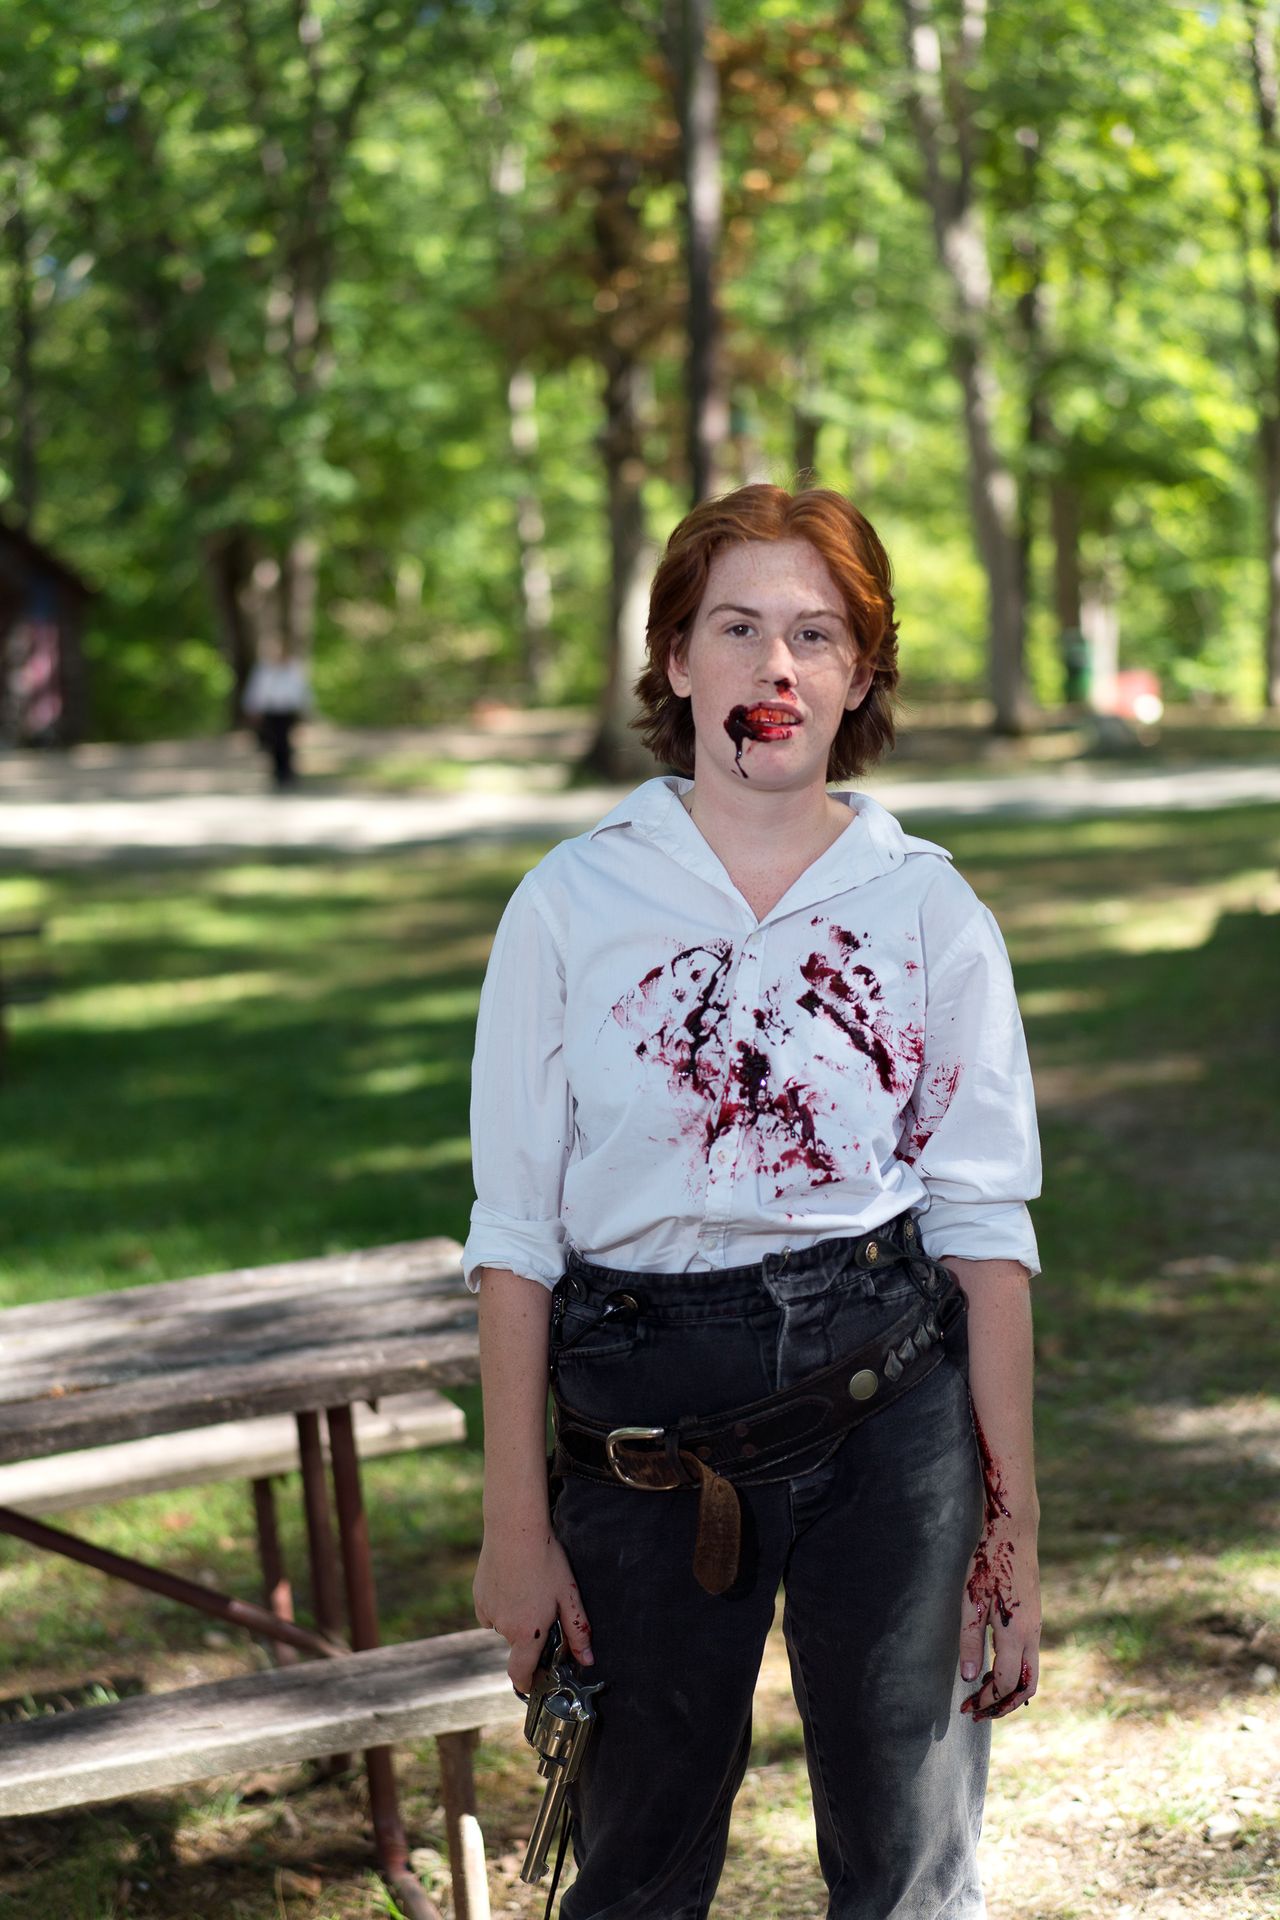 Sarah Hale, a self-described Jersey Girl, who’s been working at Wild West City for three years. She started out in the General Store before being promoted to Cowgirl. Sarah just finished a scene in which she got shot up. “It's fake blood,” she said. “It tastes like cherry cough syrup, almost."